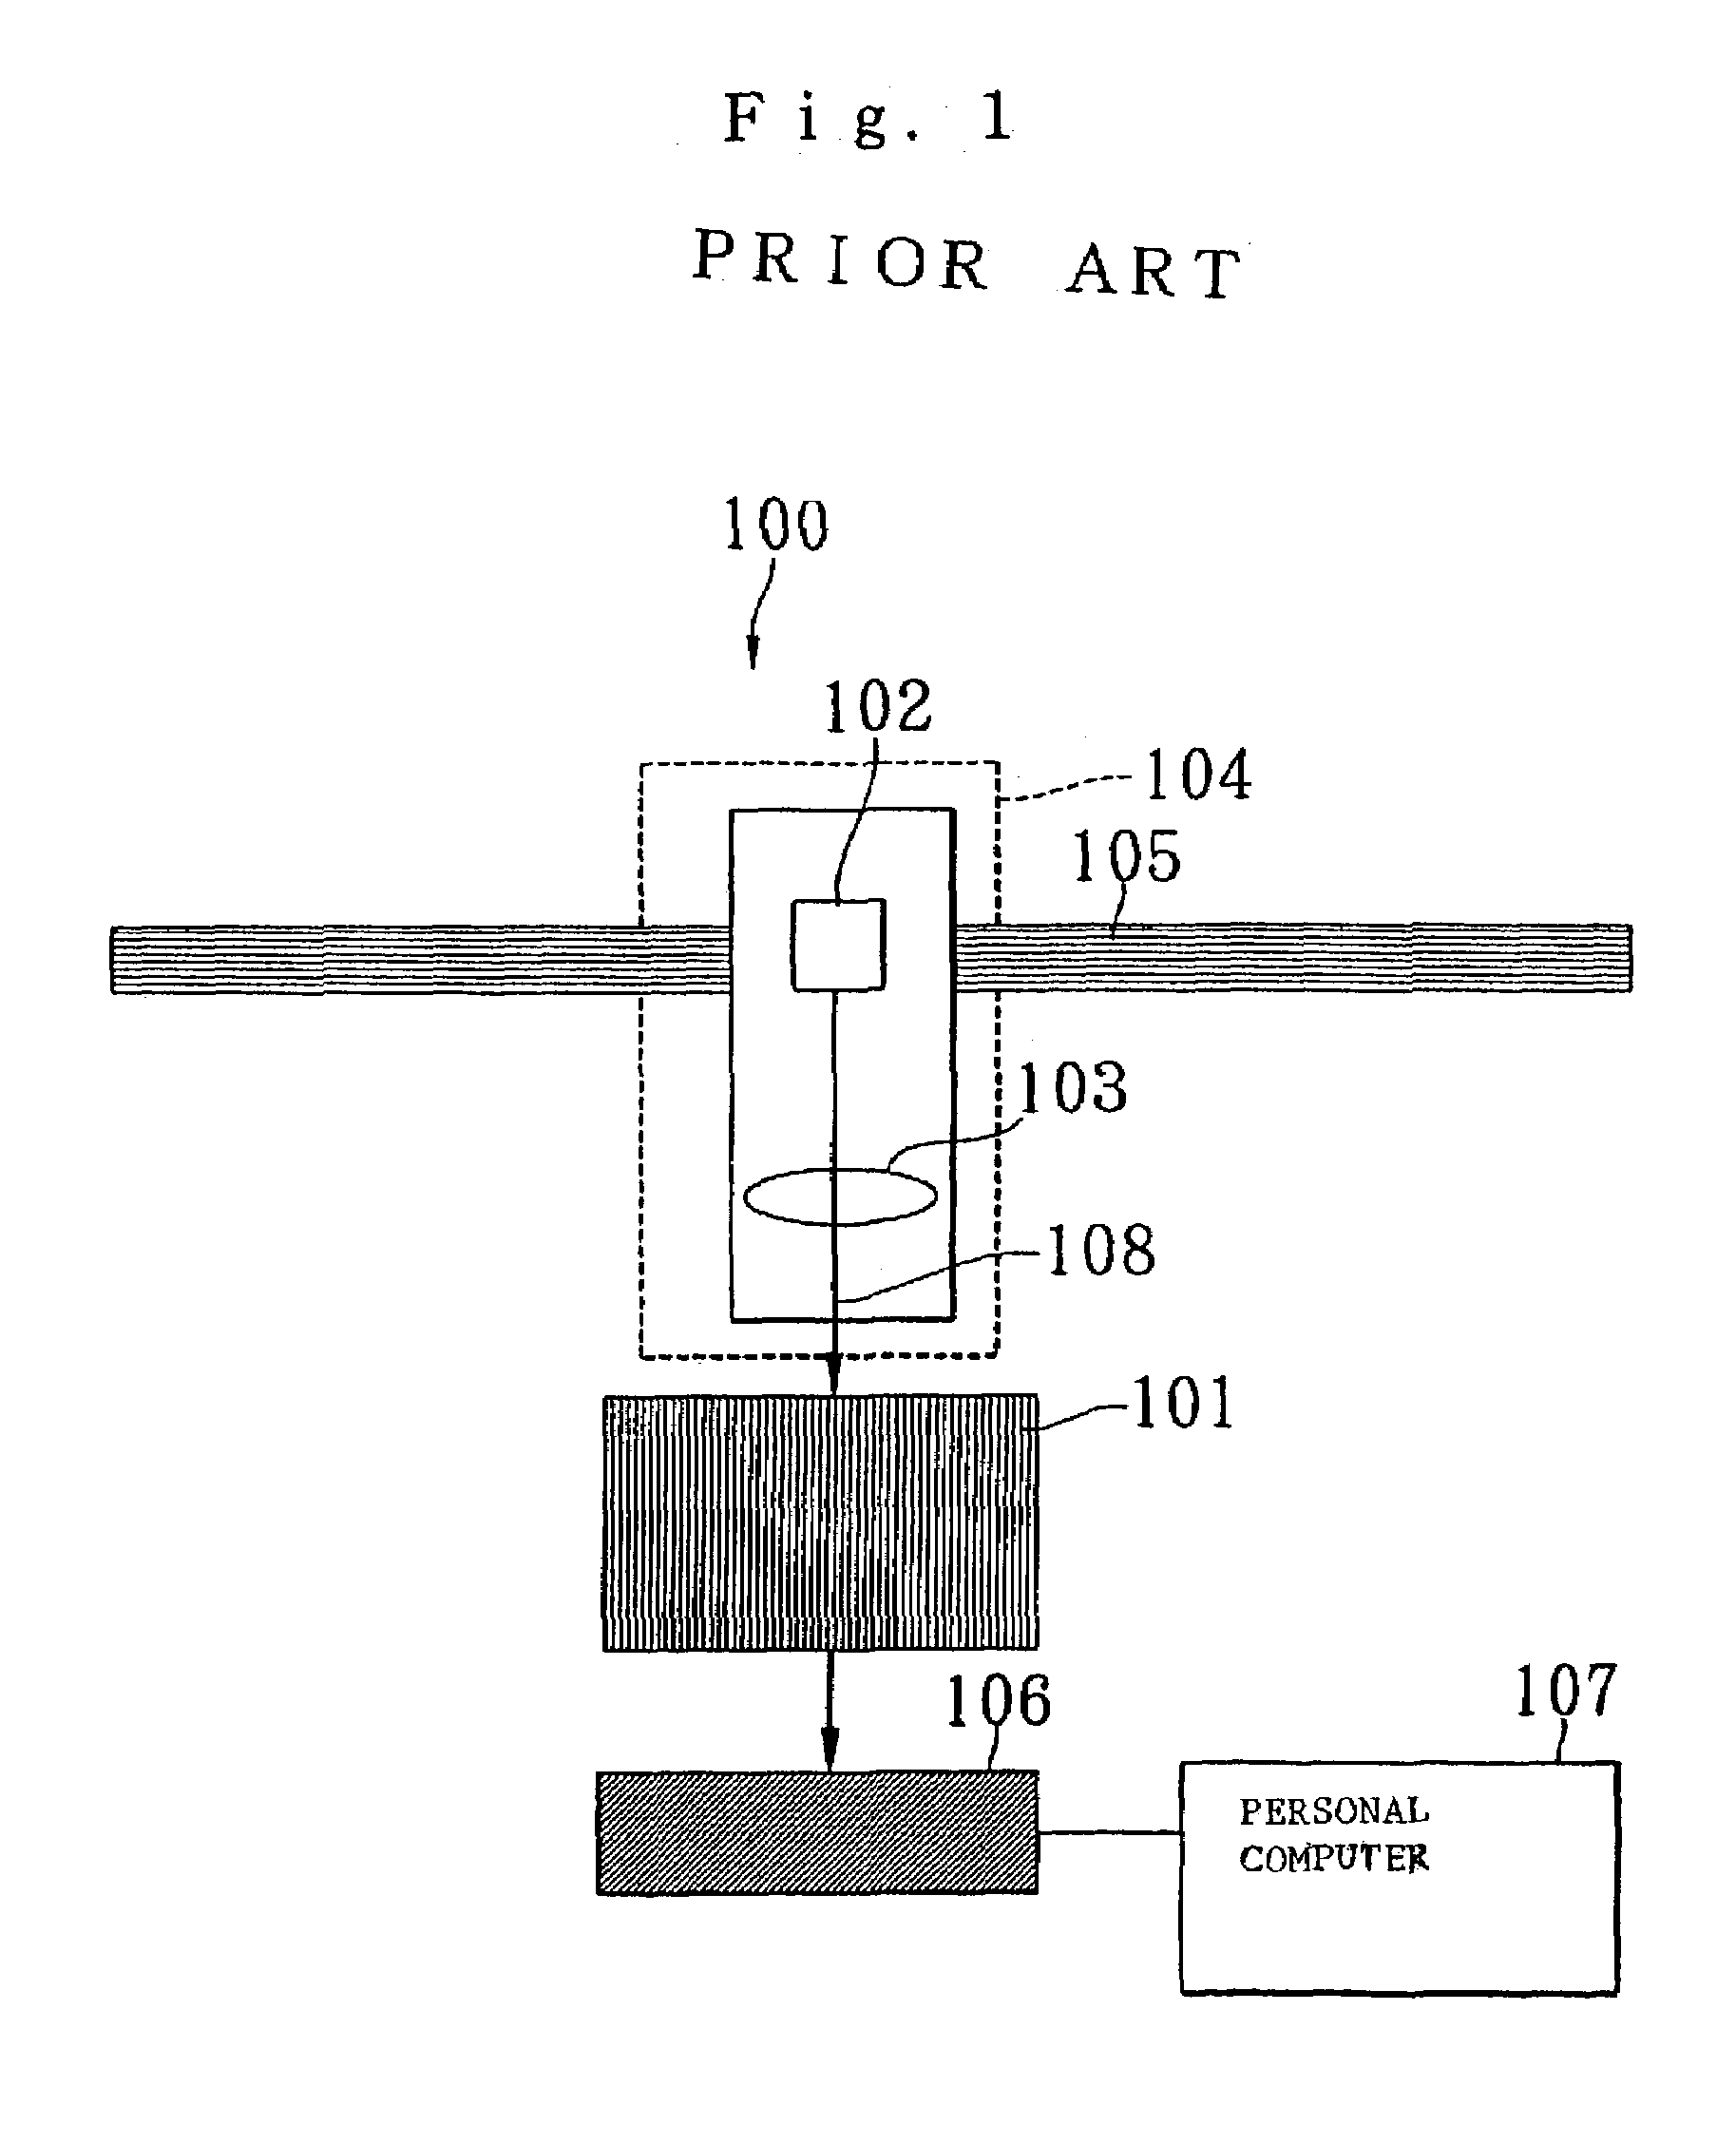 Method of inspecting optical waveguide substrate for optical conduction at increased speed and also inspecting optical waveguide substrate for crosstalk